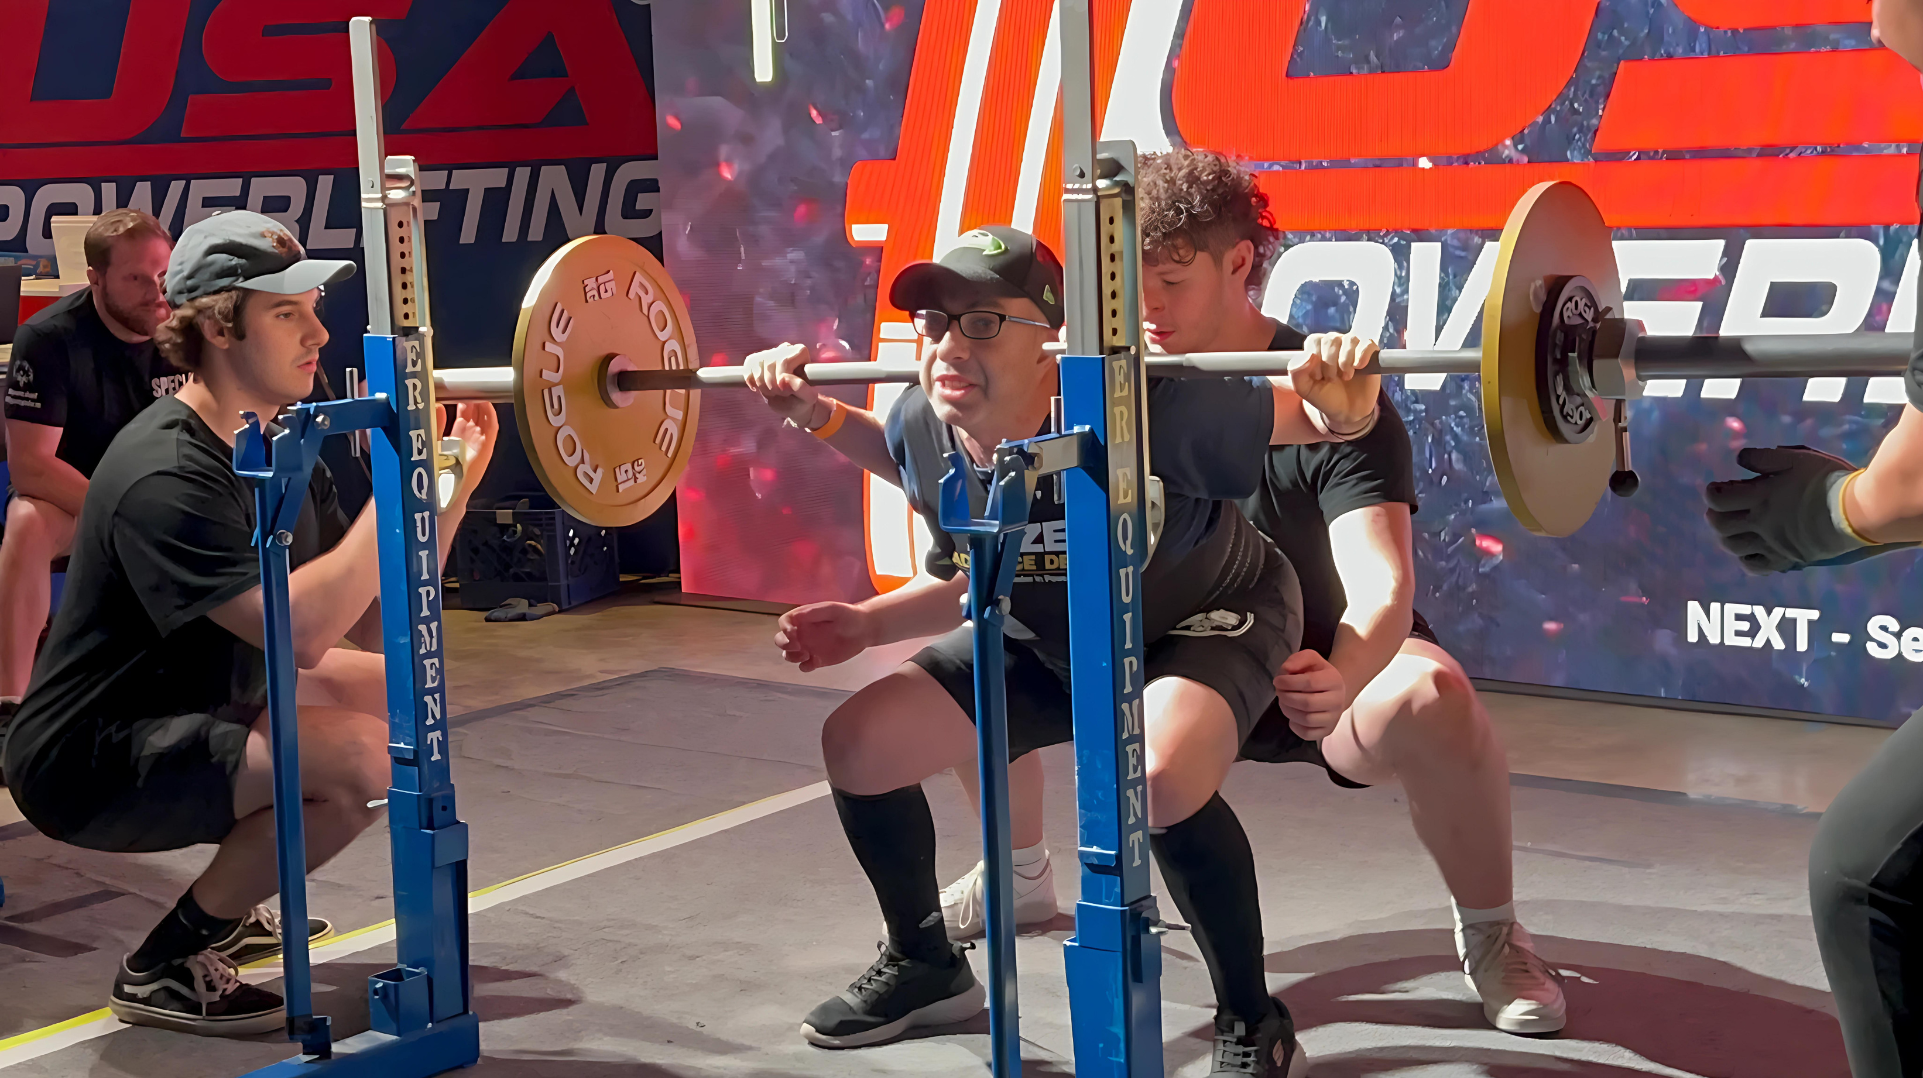 Gabriel Homes resident at powerlifting tournament.